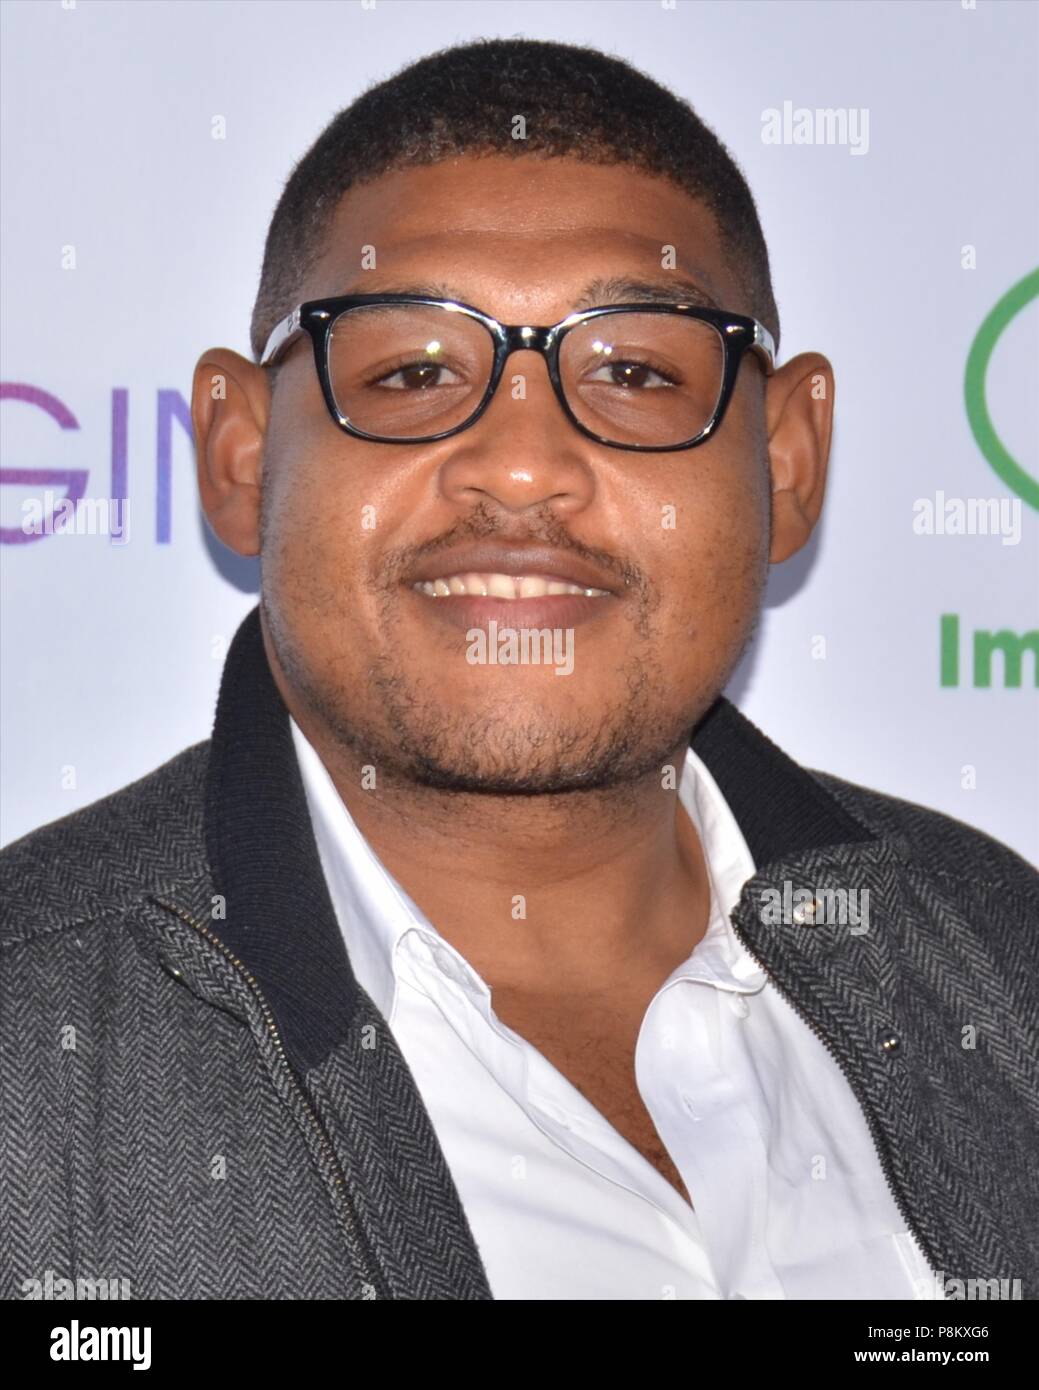 Hollywood, California, USA. 4th June, 2015. OMAR MILLER attends the 2015 Imagine Ball at the House of Blues. Credit: Billy Bennight/ZUMA Wire/Alamy Live News Stock Photo